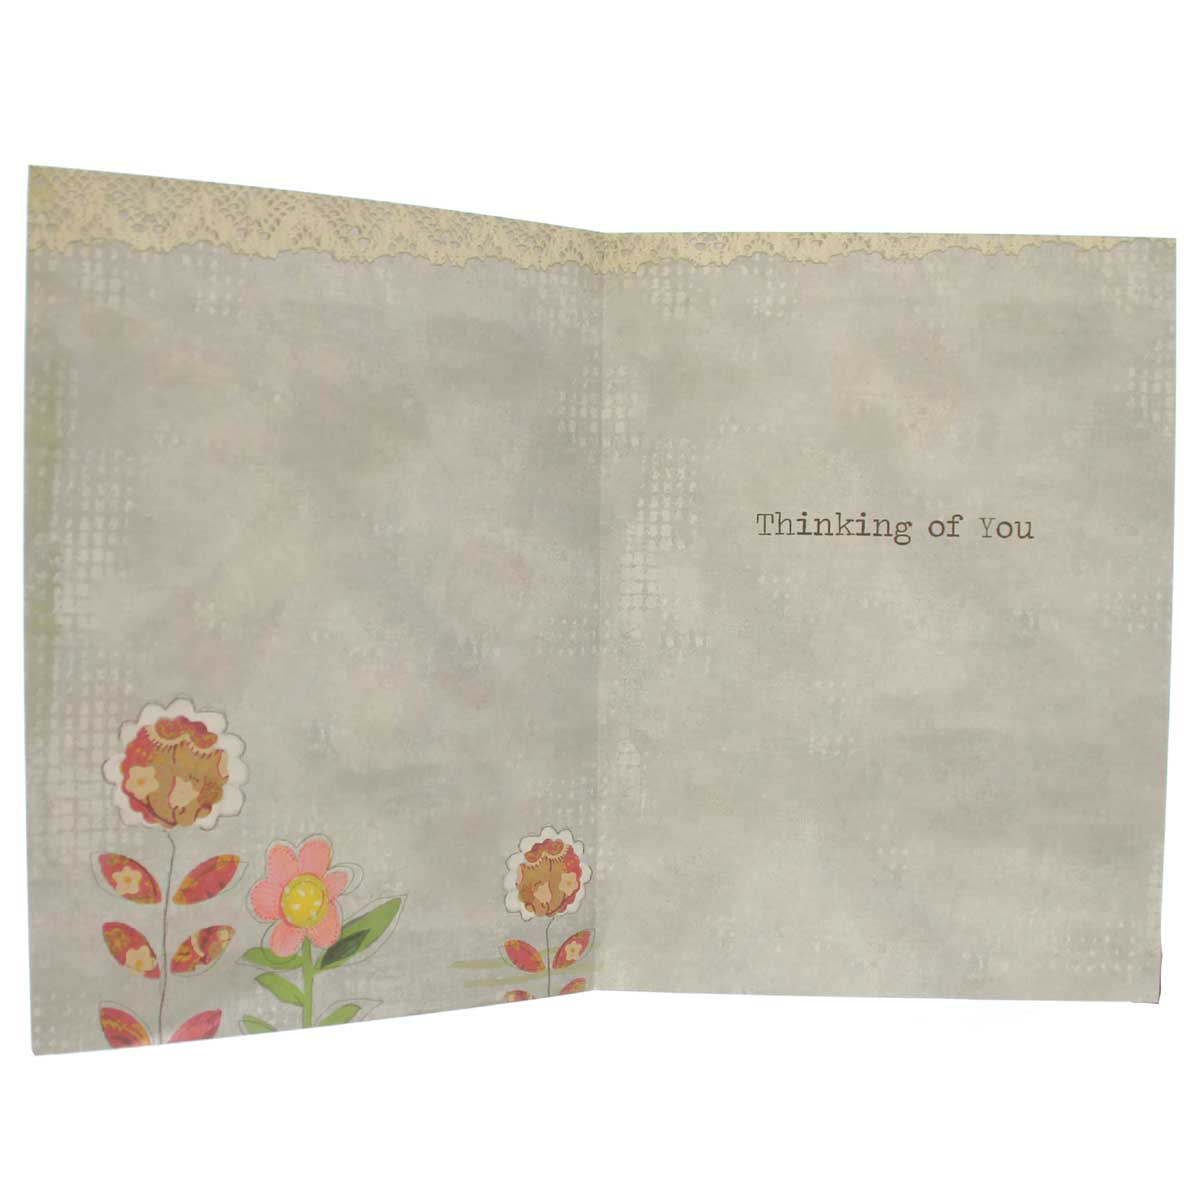 Thinking of You Card: May your soul be unburdened and...